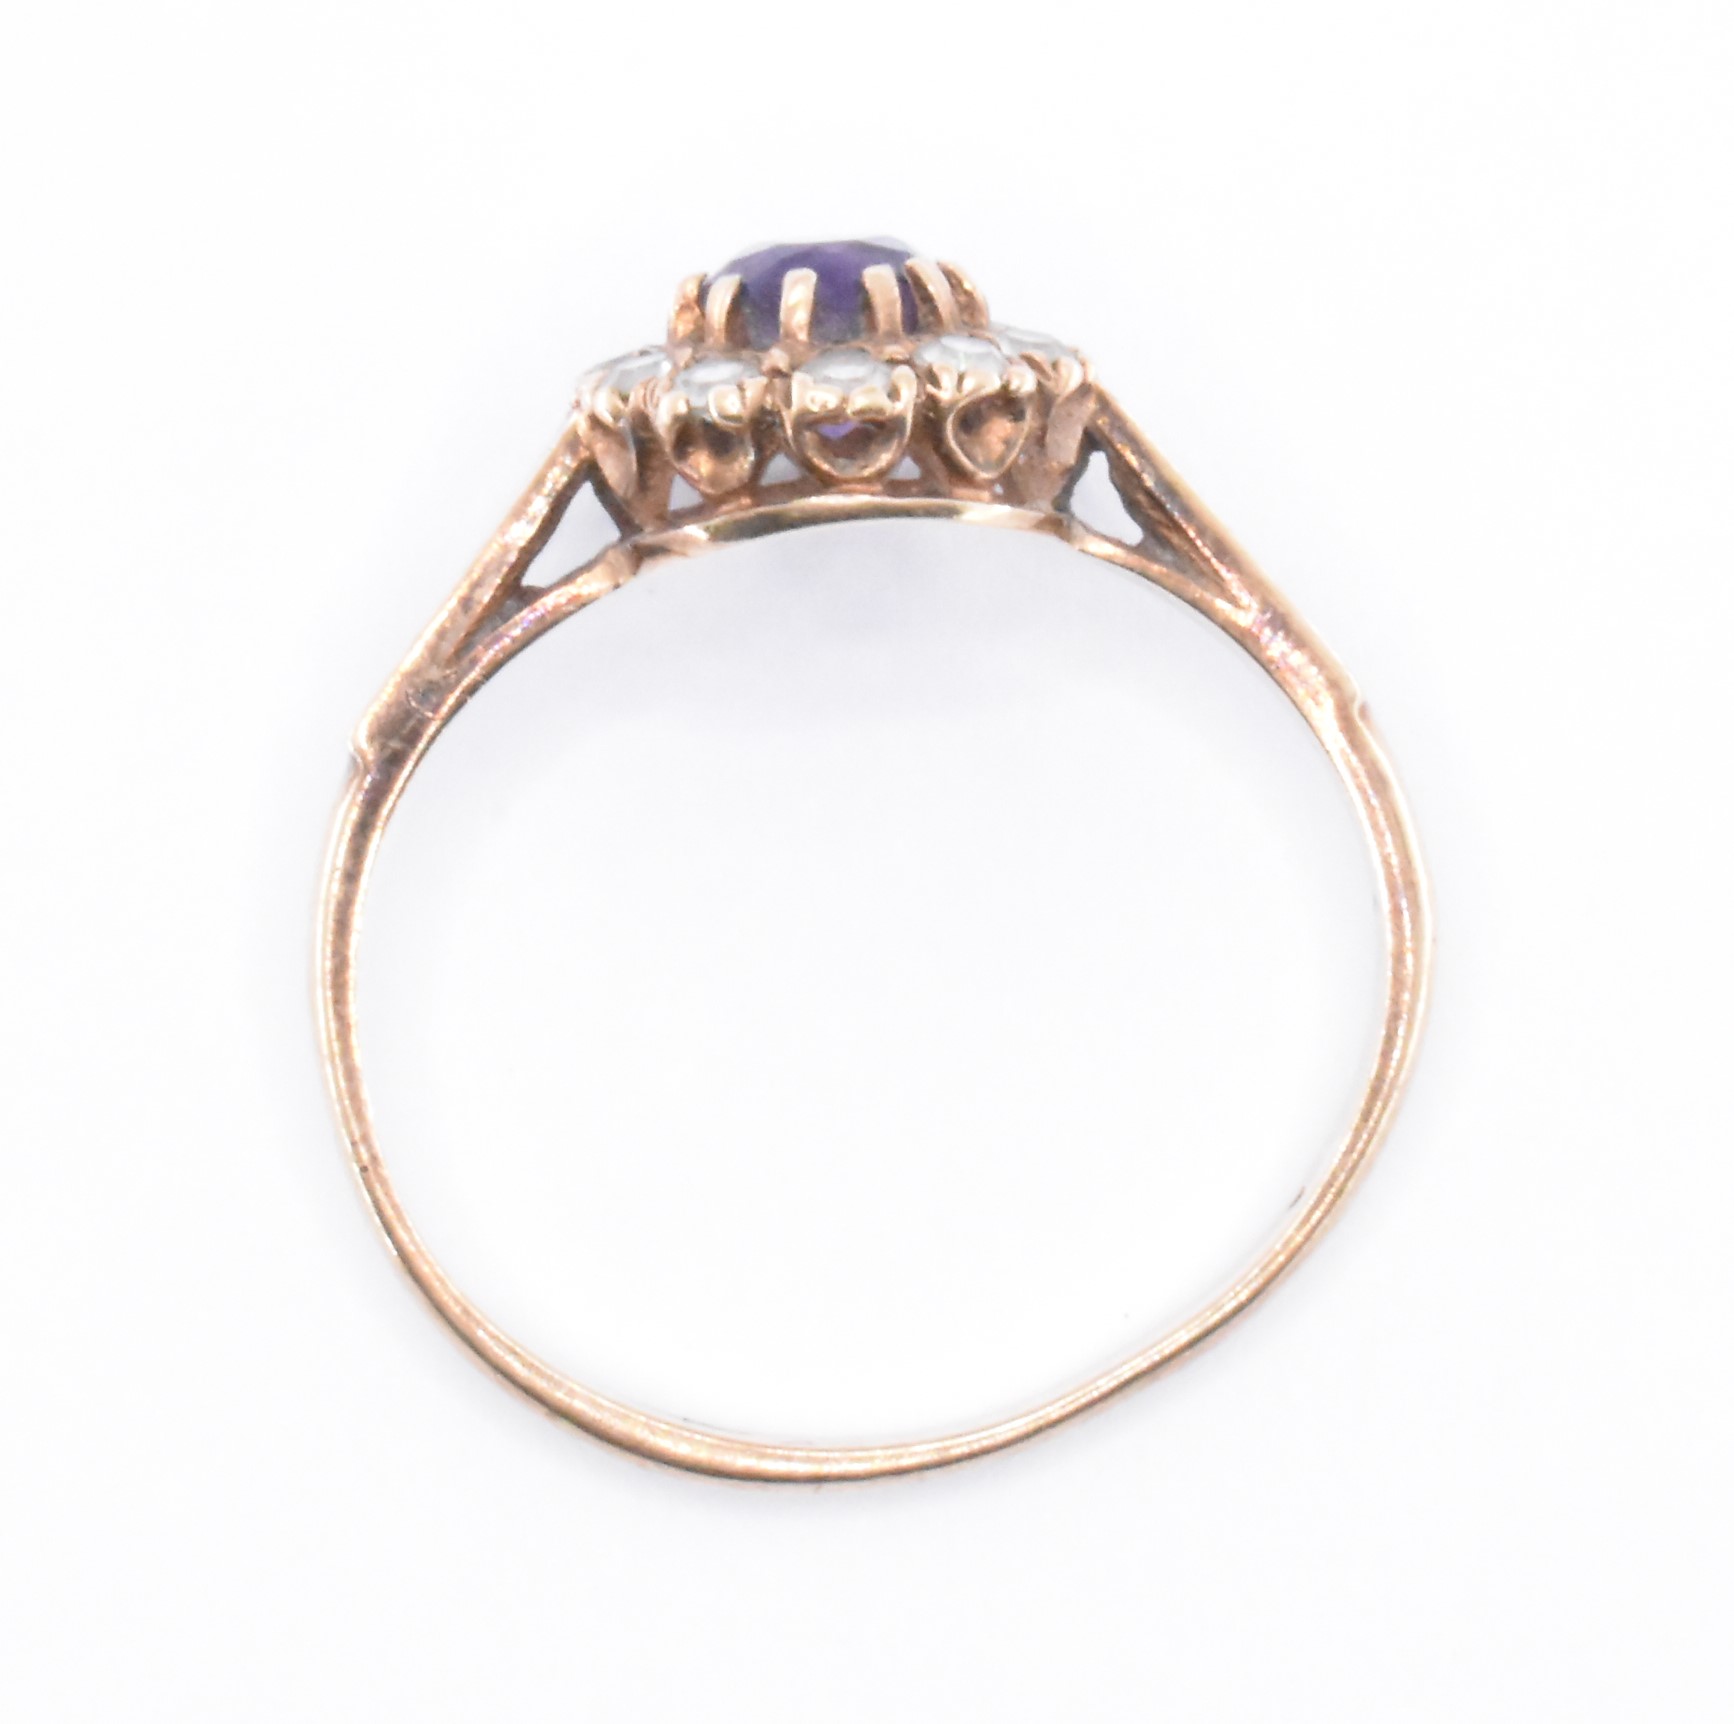 GOLD AMETHYST & WHITE STONE CLUSTER RING - Image 6 of 6